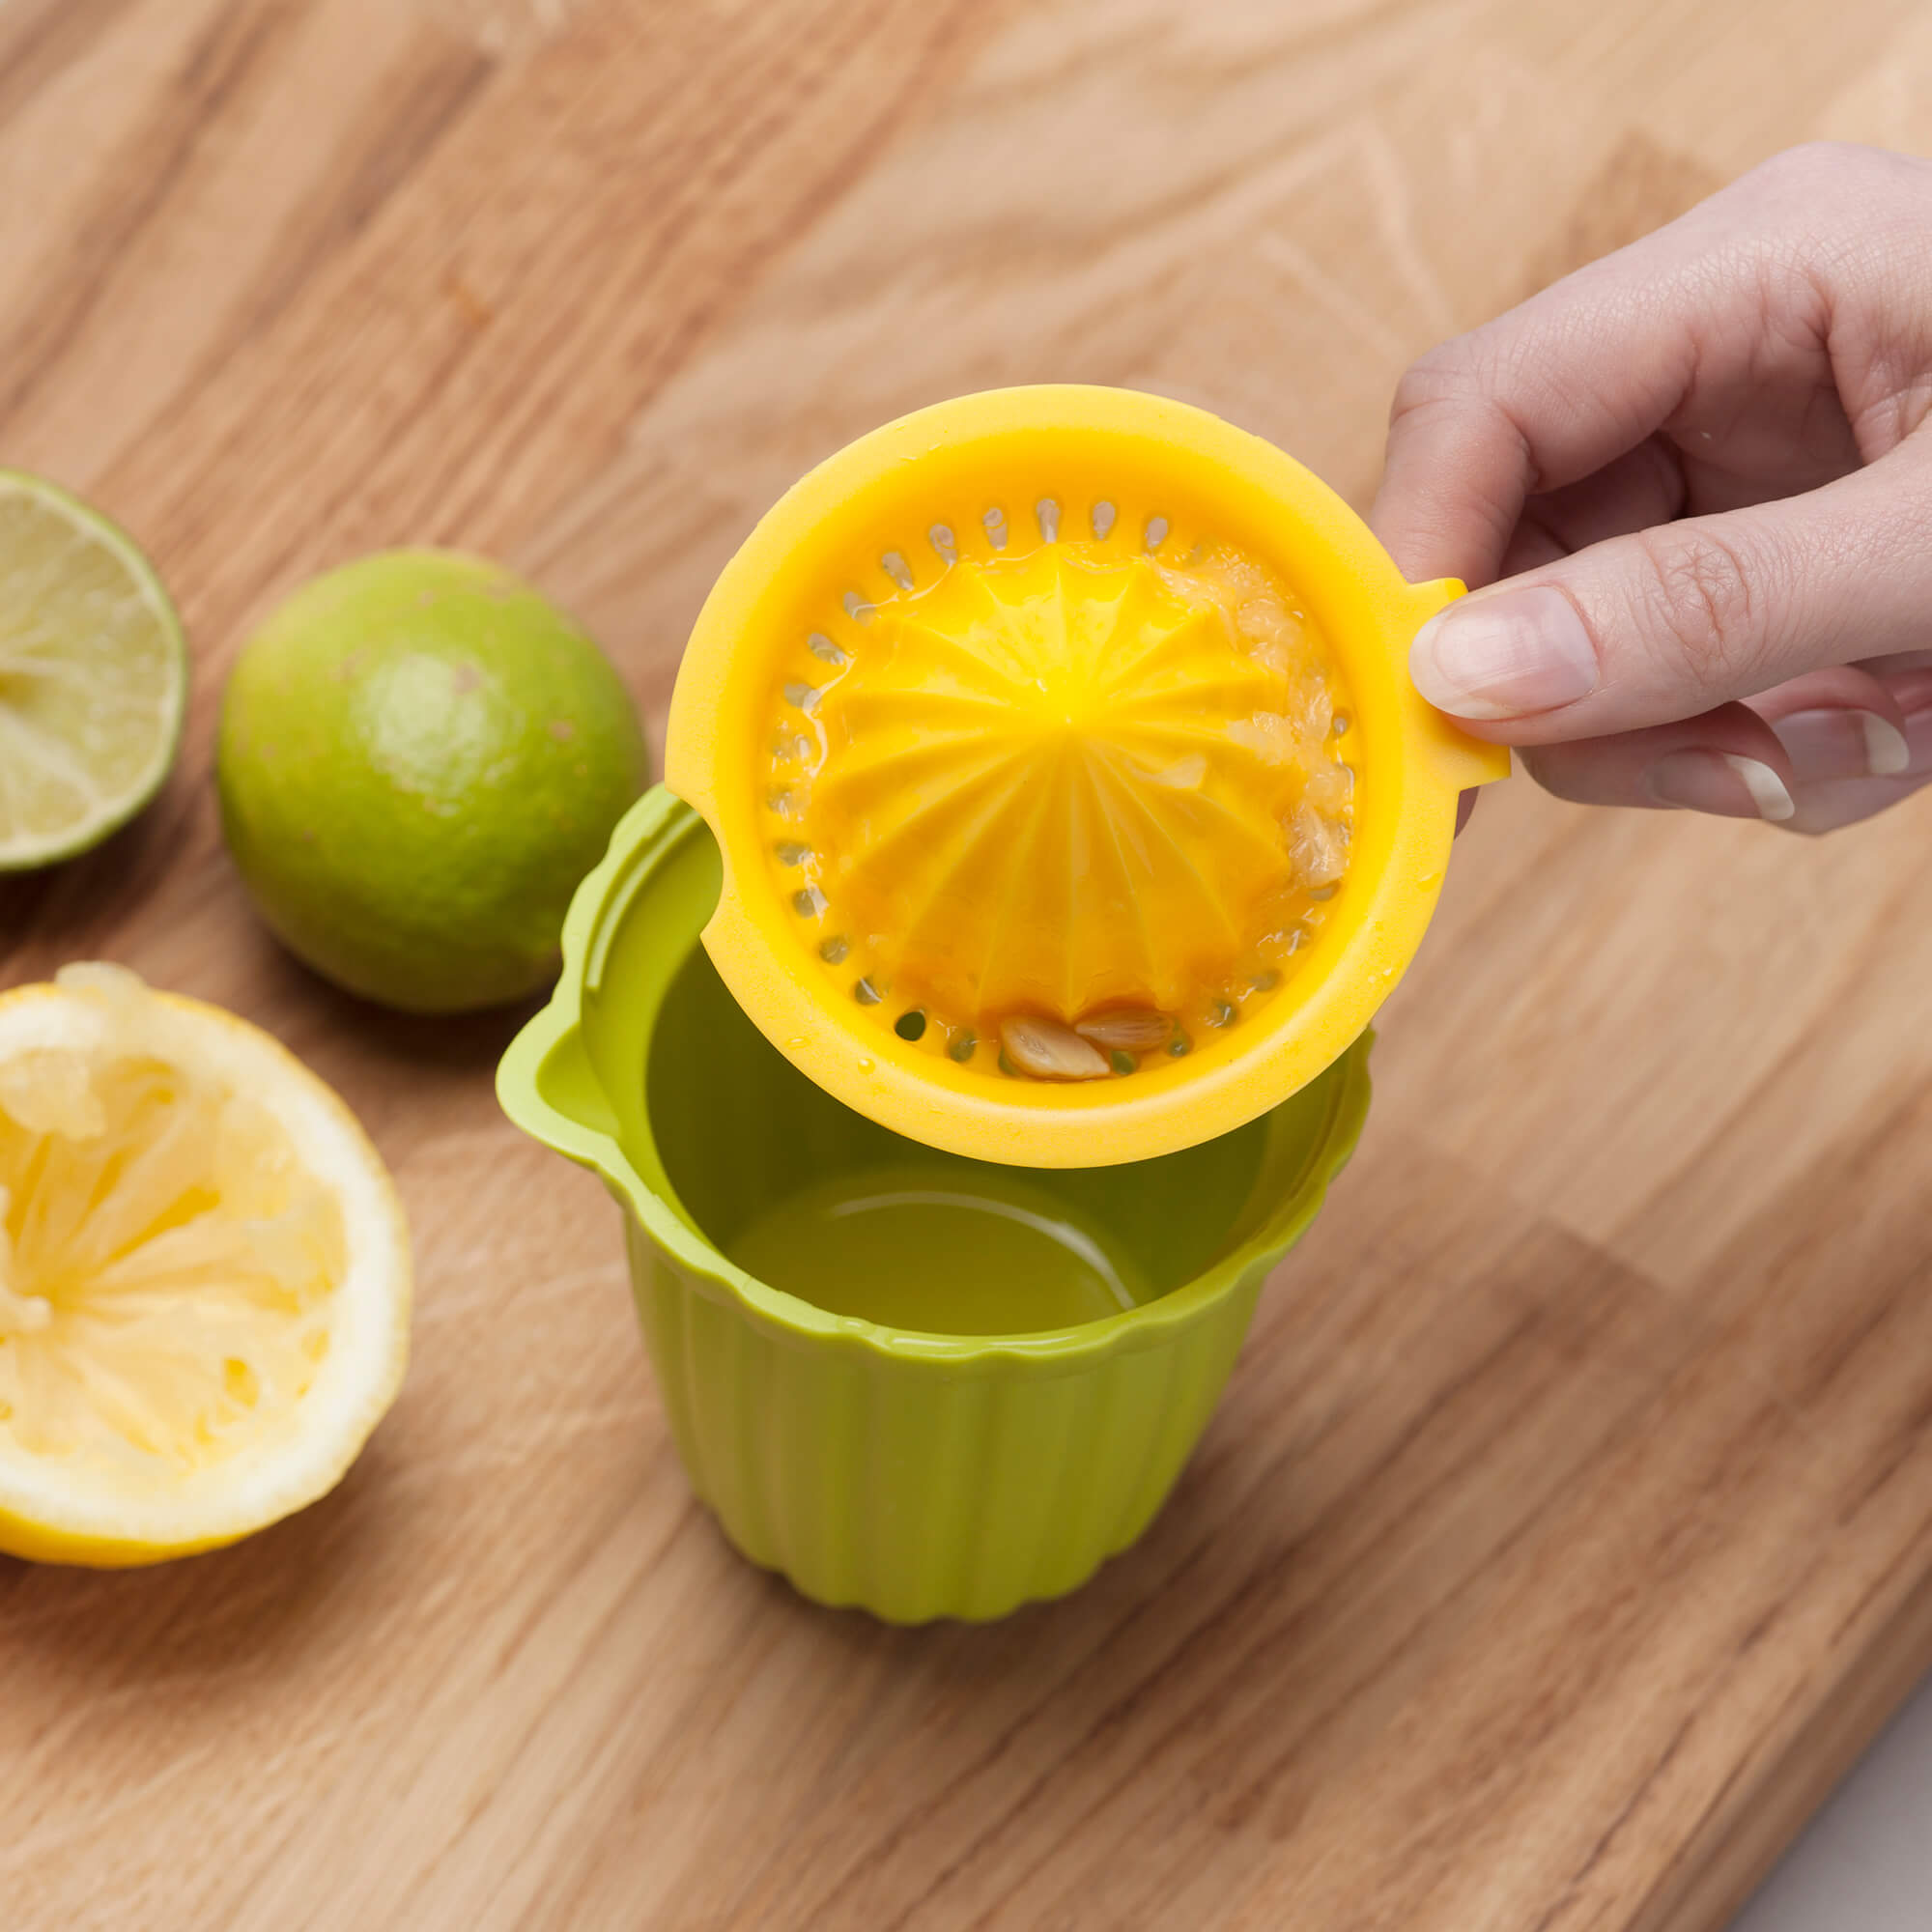 Zeal Citrus Juicer with a filter for pips and pulp